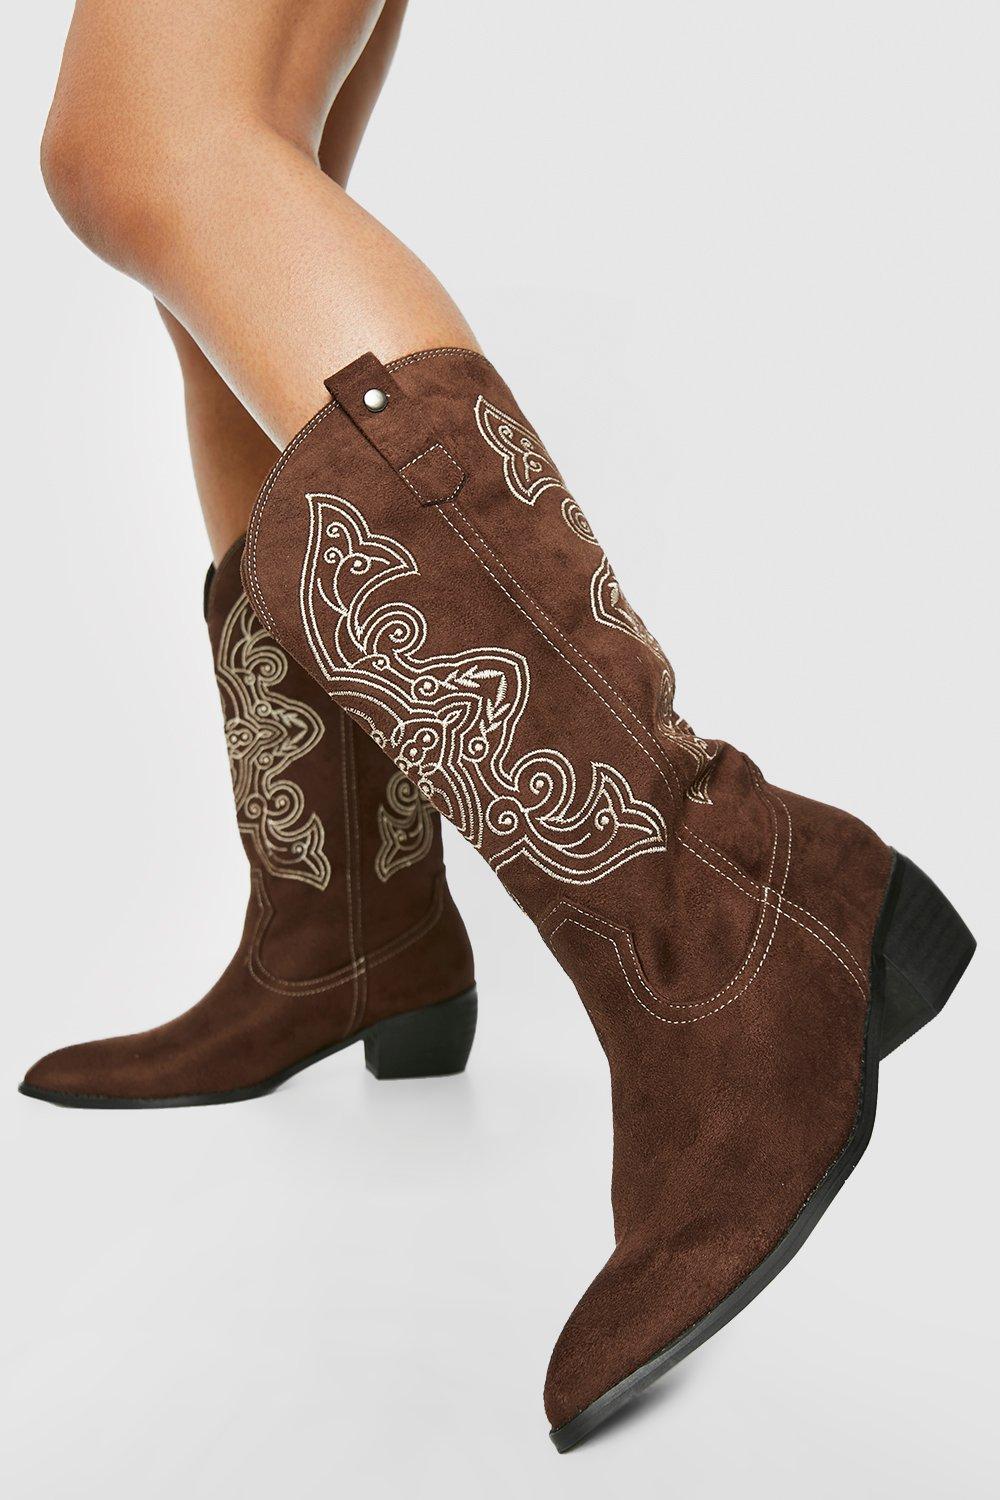 https://media.boohoo.com/i/boohoo/gzz44879_chocolate_xl_1/female-chocolate-wide-width-contrast-embroidered-casual-cowboy--boots